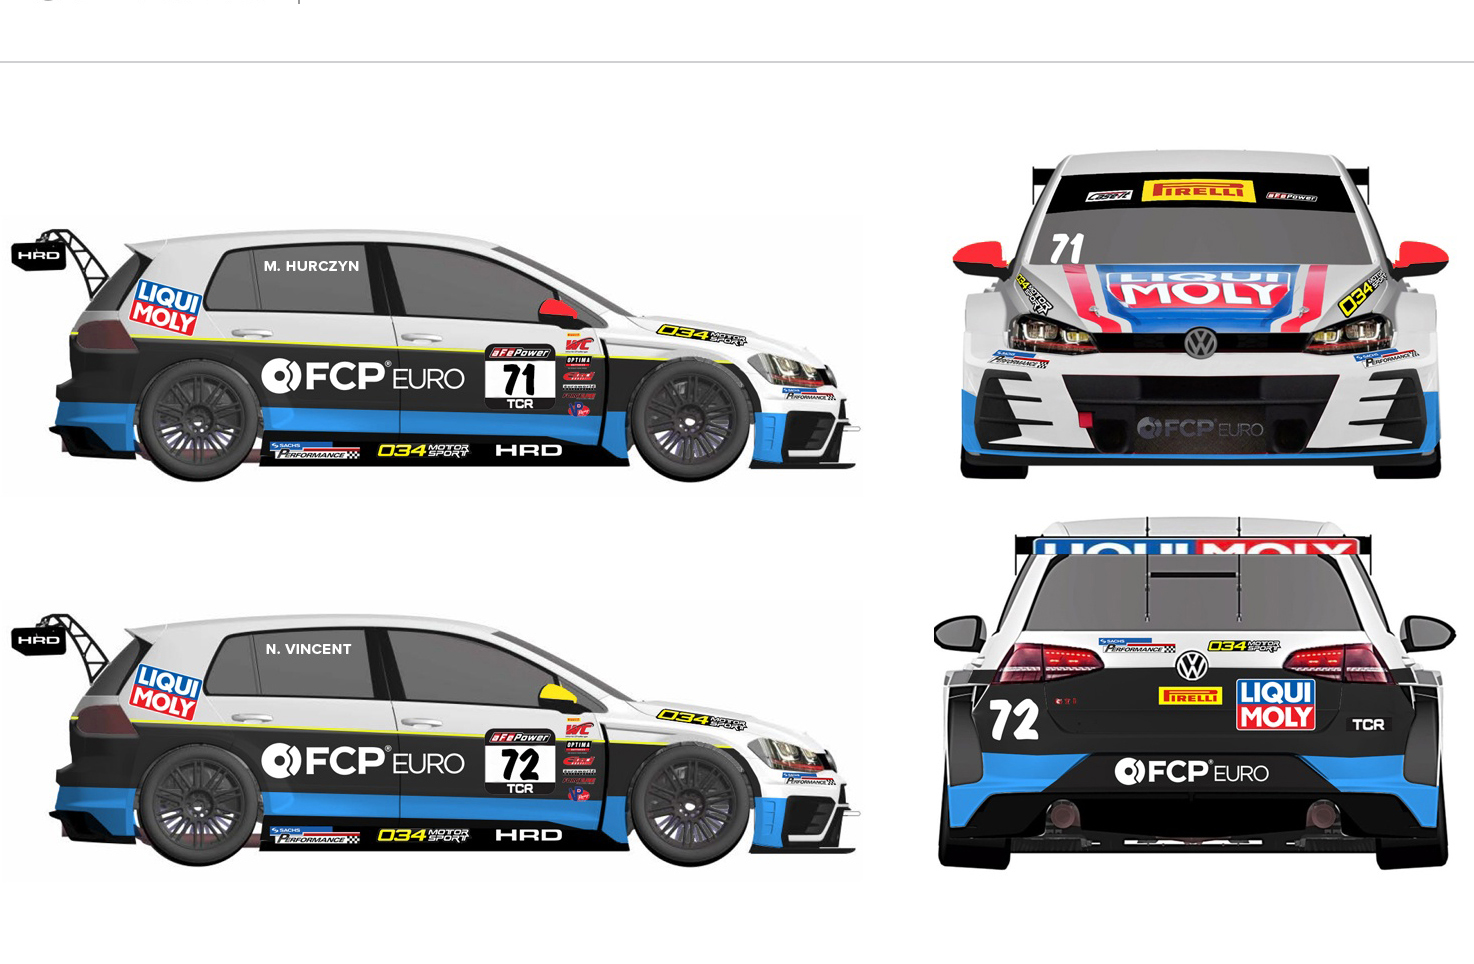 HRD in the TCR class with three Golf cars